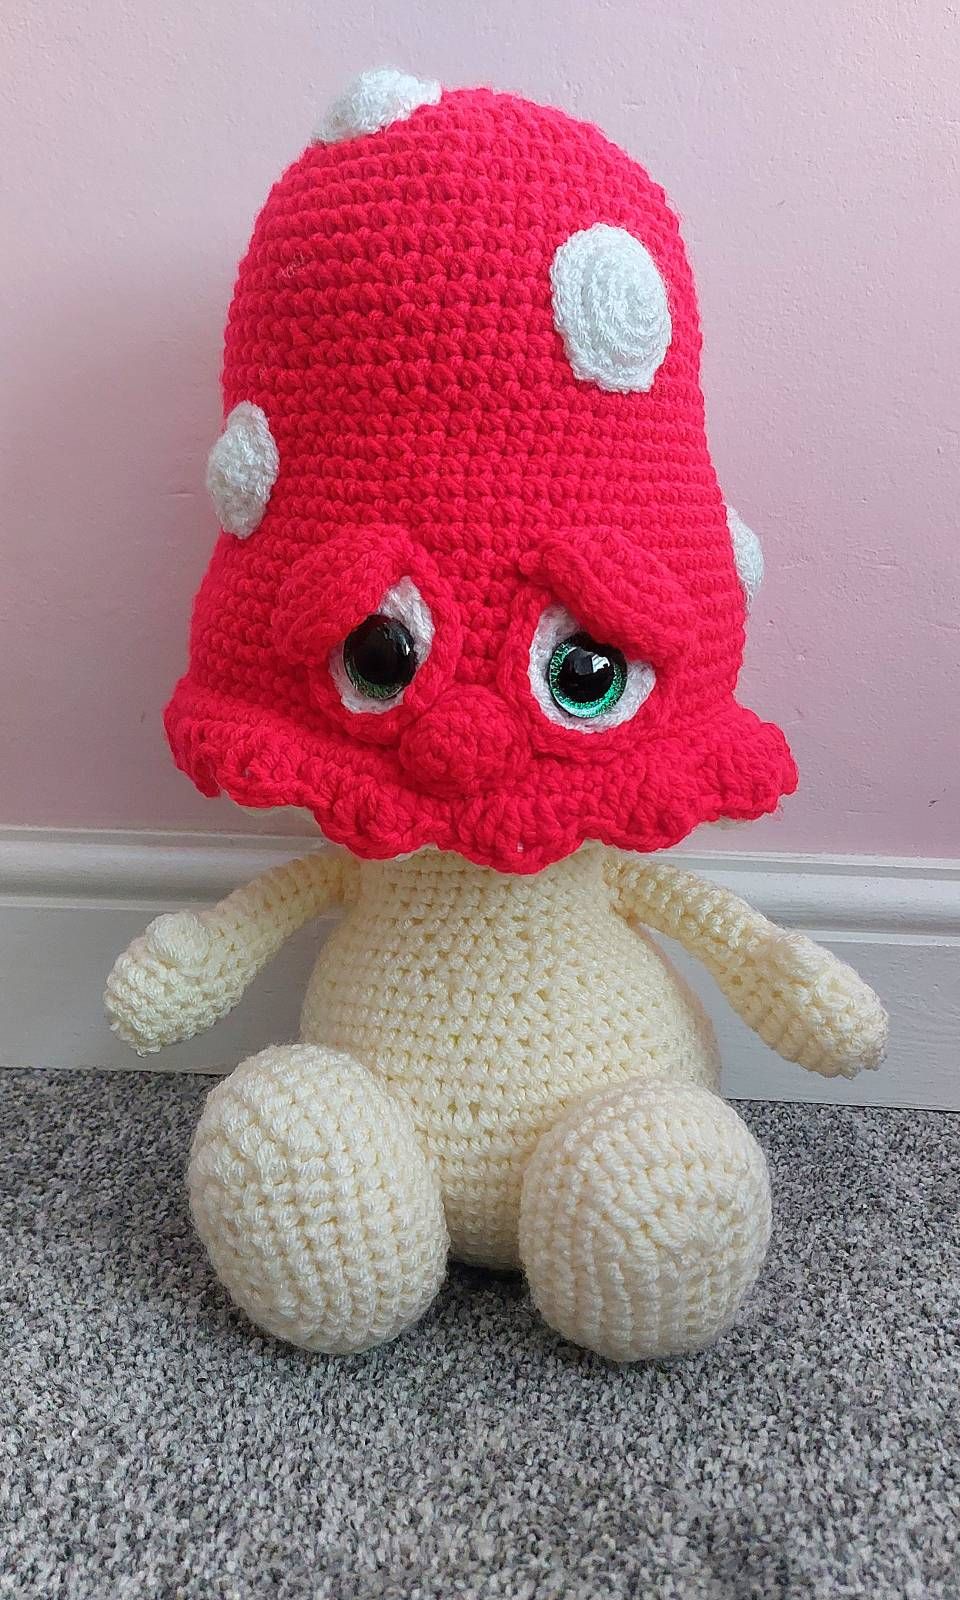 Sherman the cuddle toadstool photo review